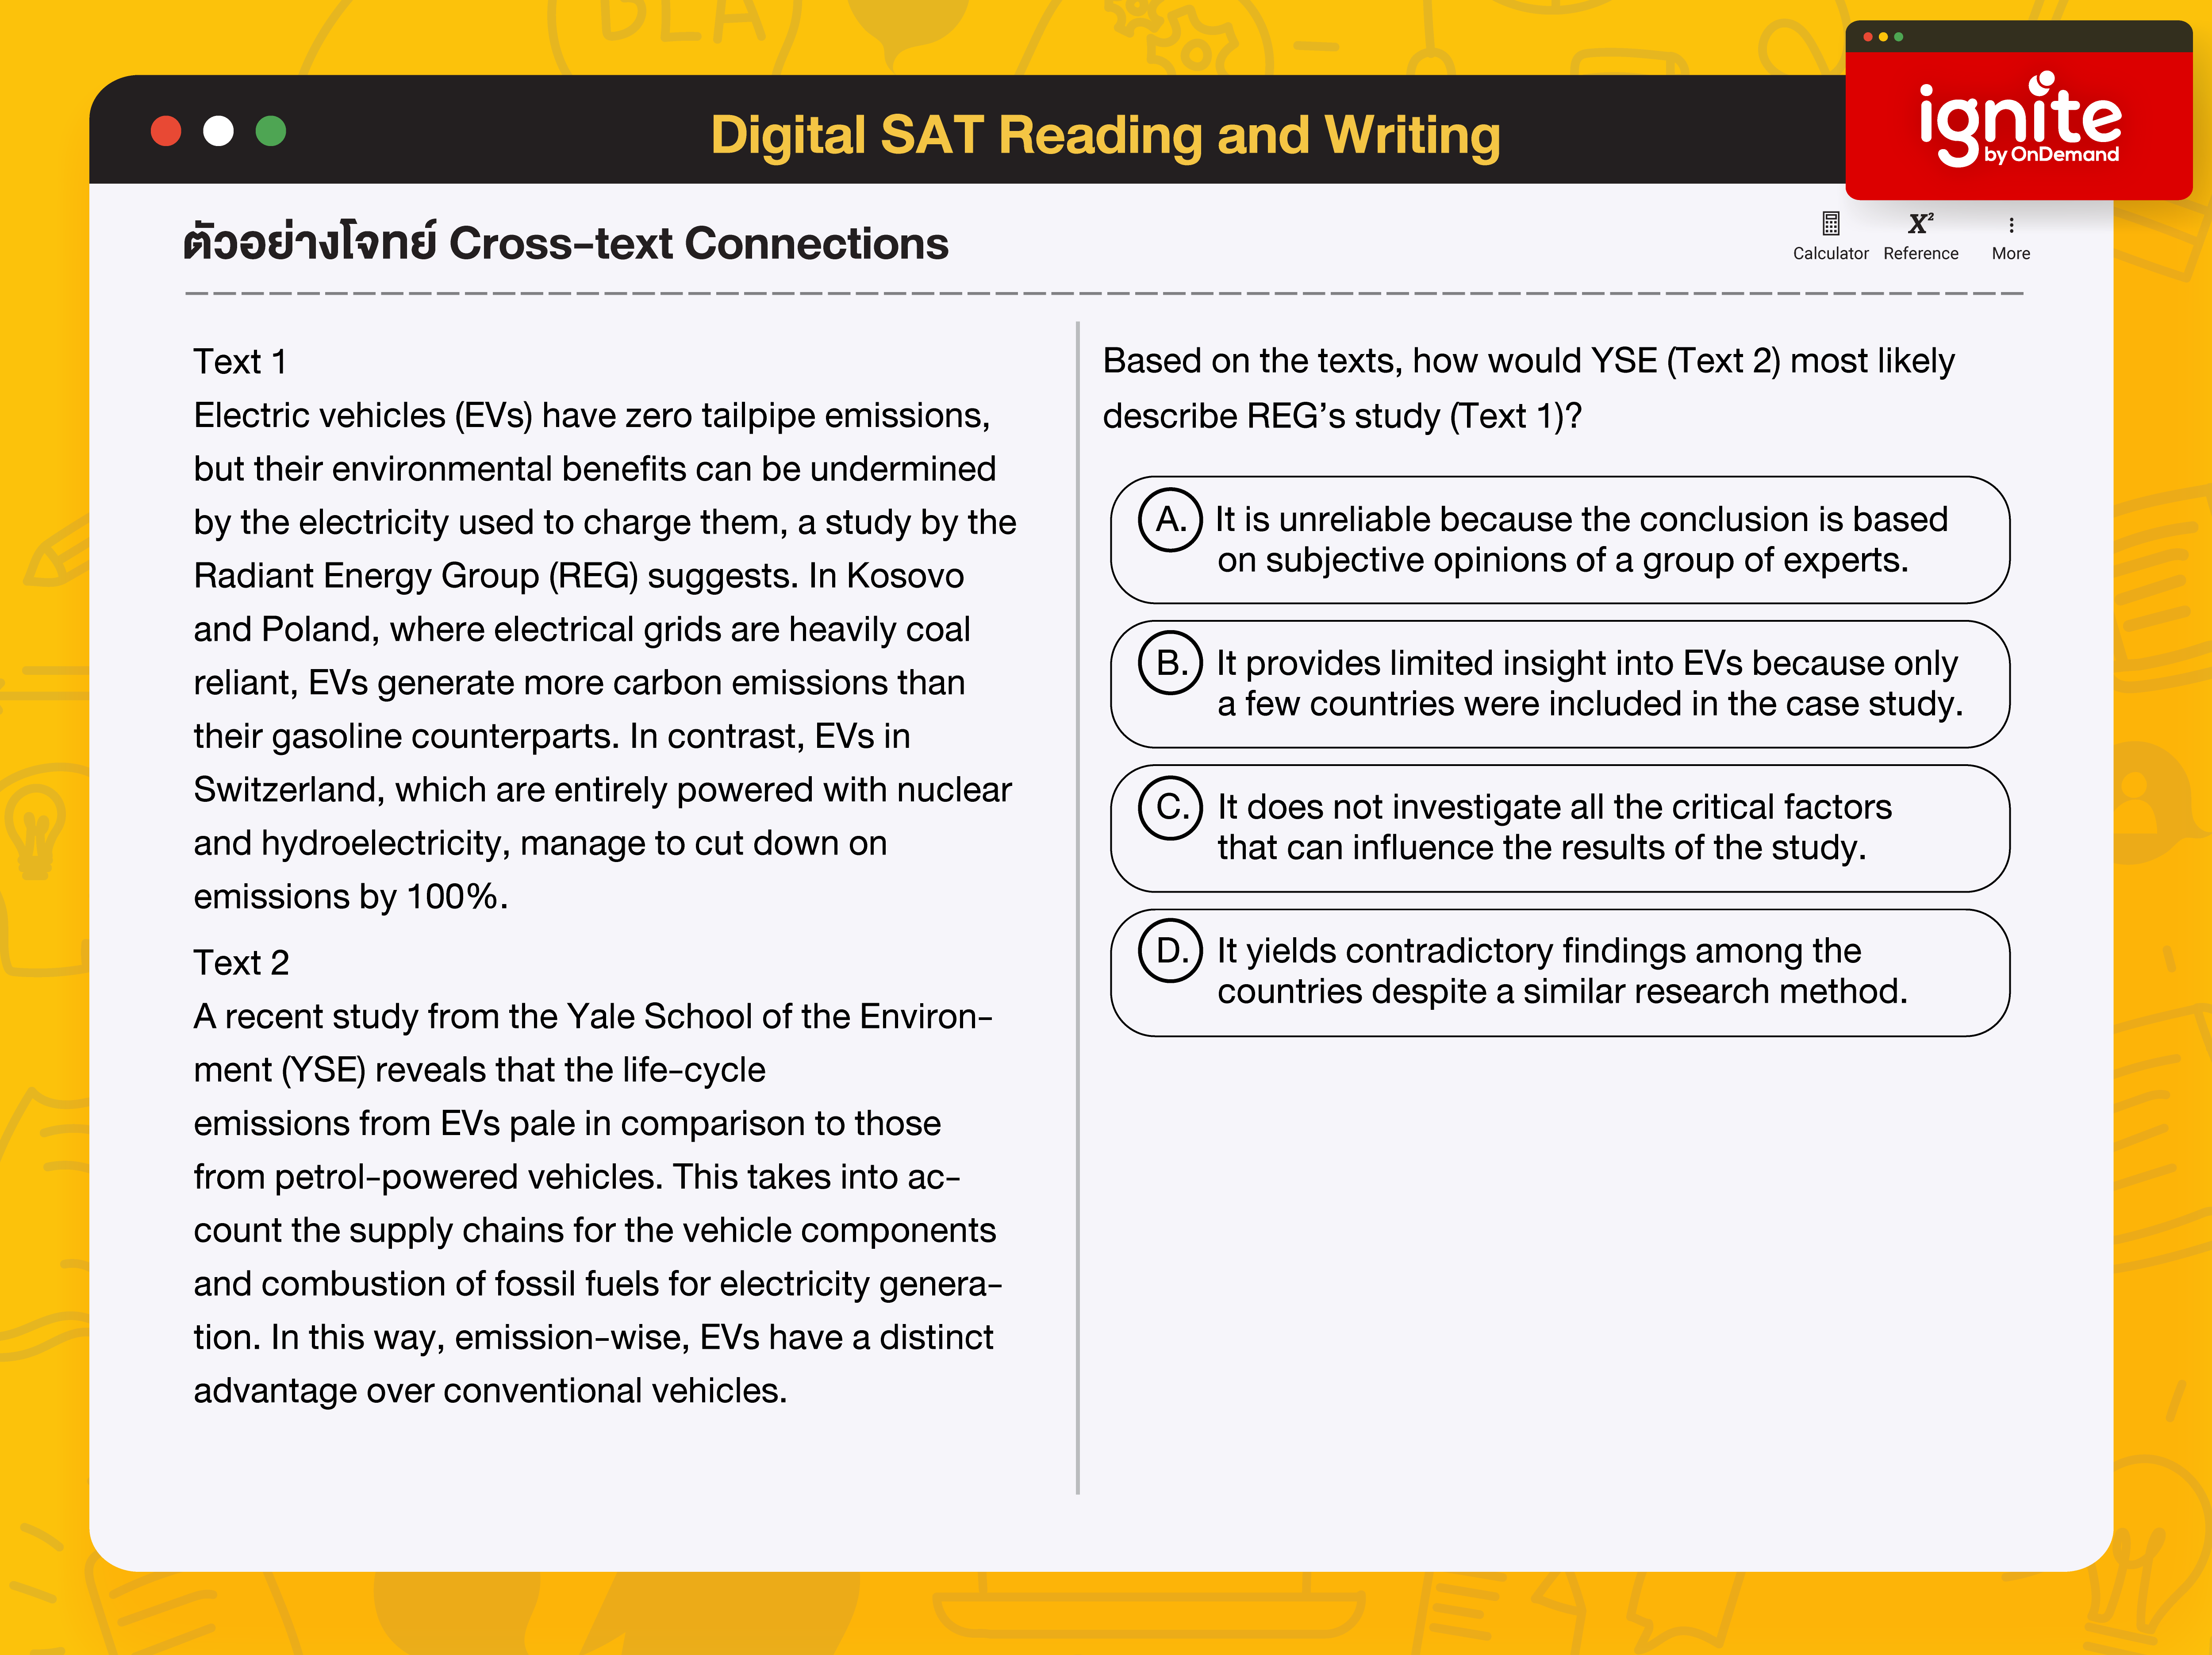 Cross text Connections - Digital SAT Reading and Wrting 2023 - ignite by OnDemand